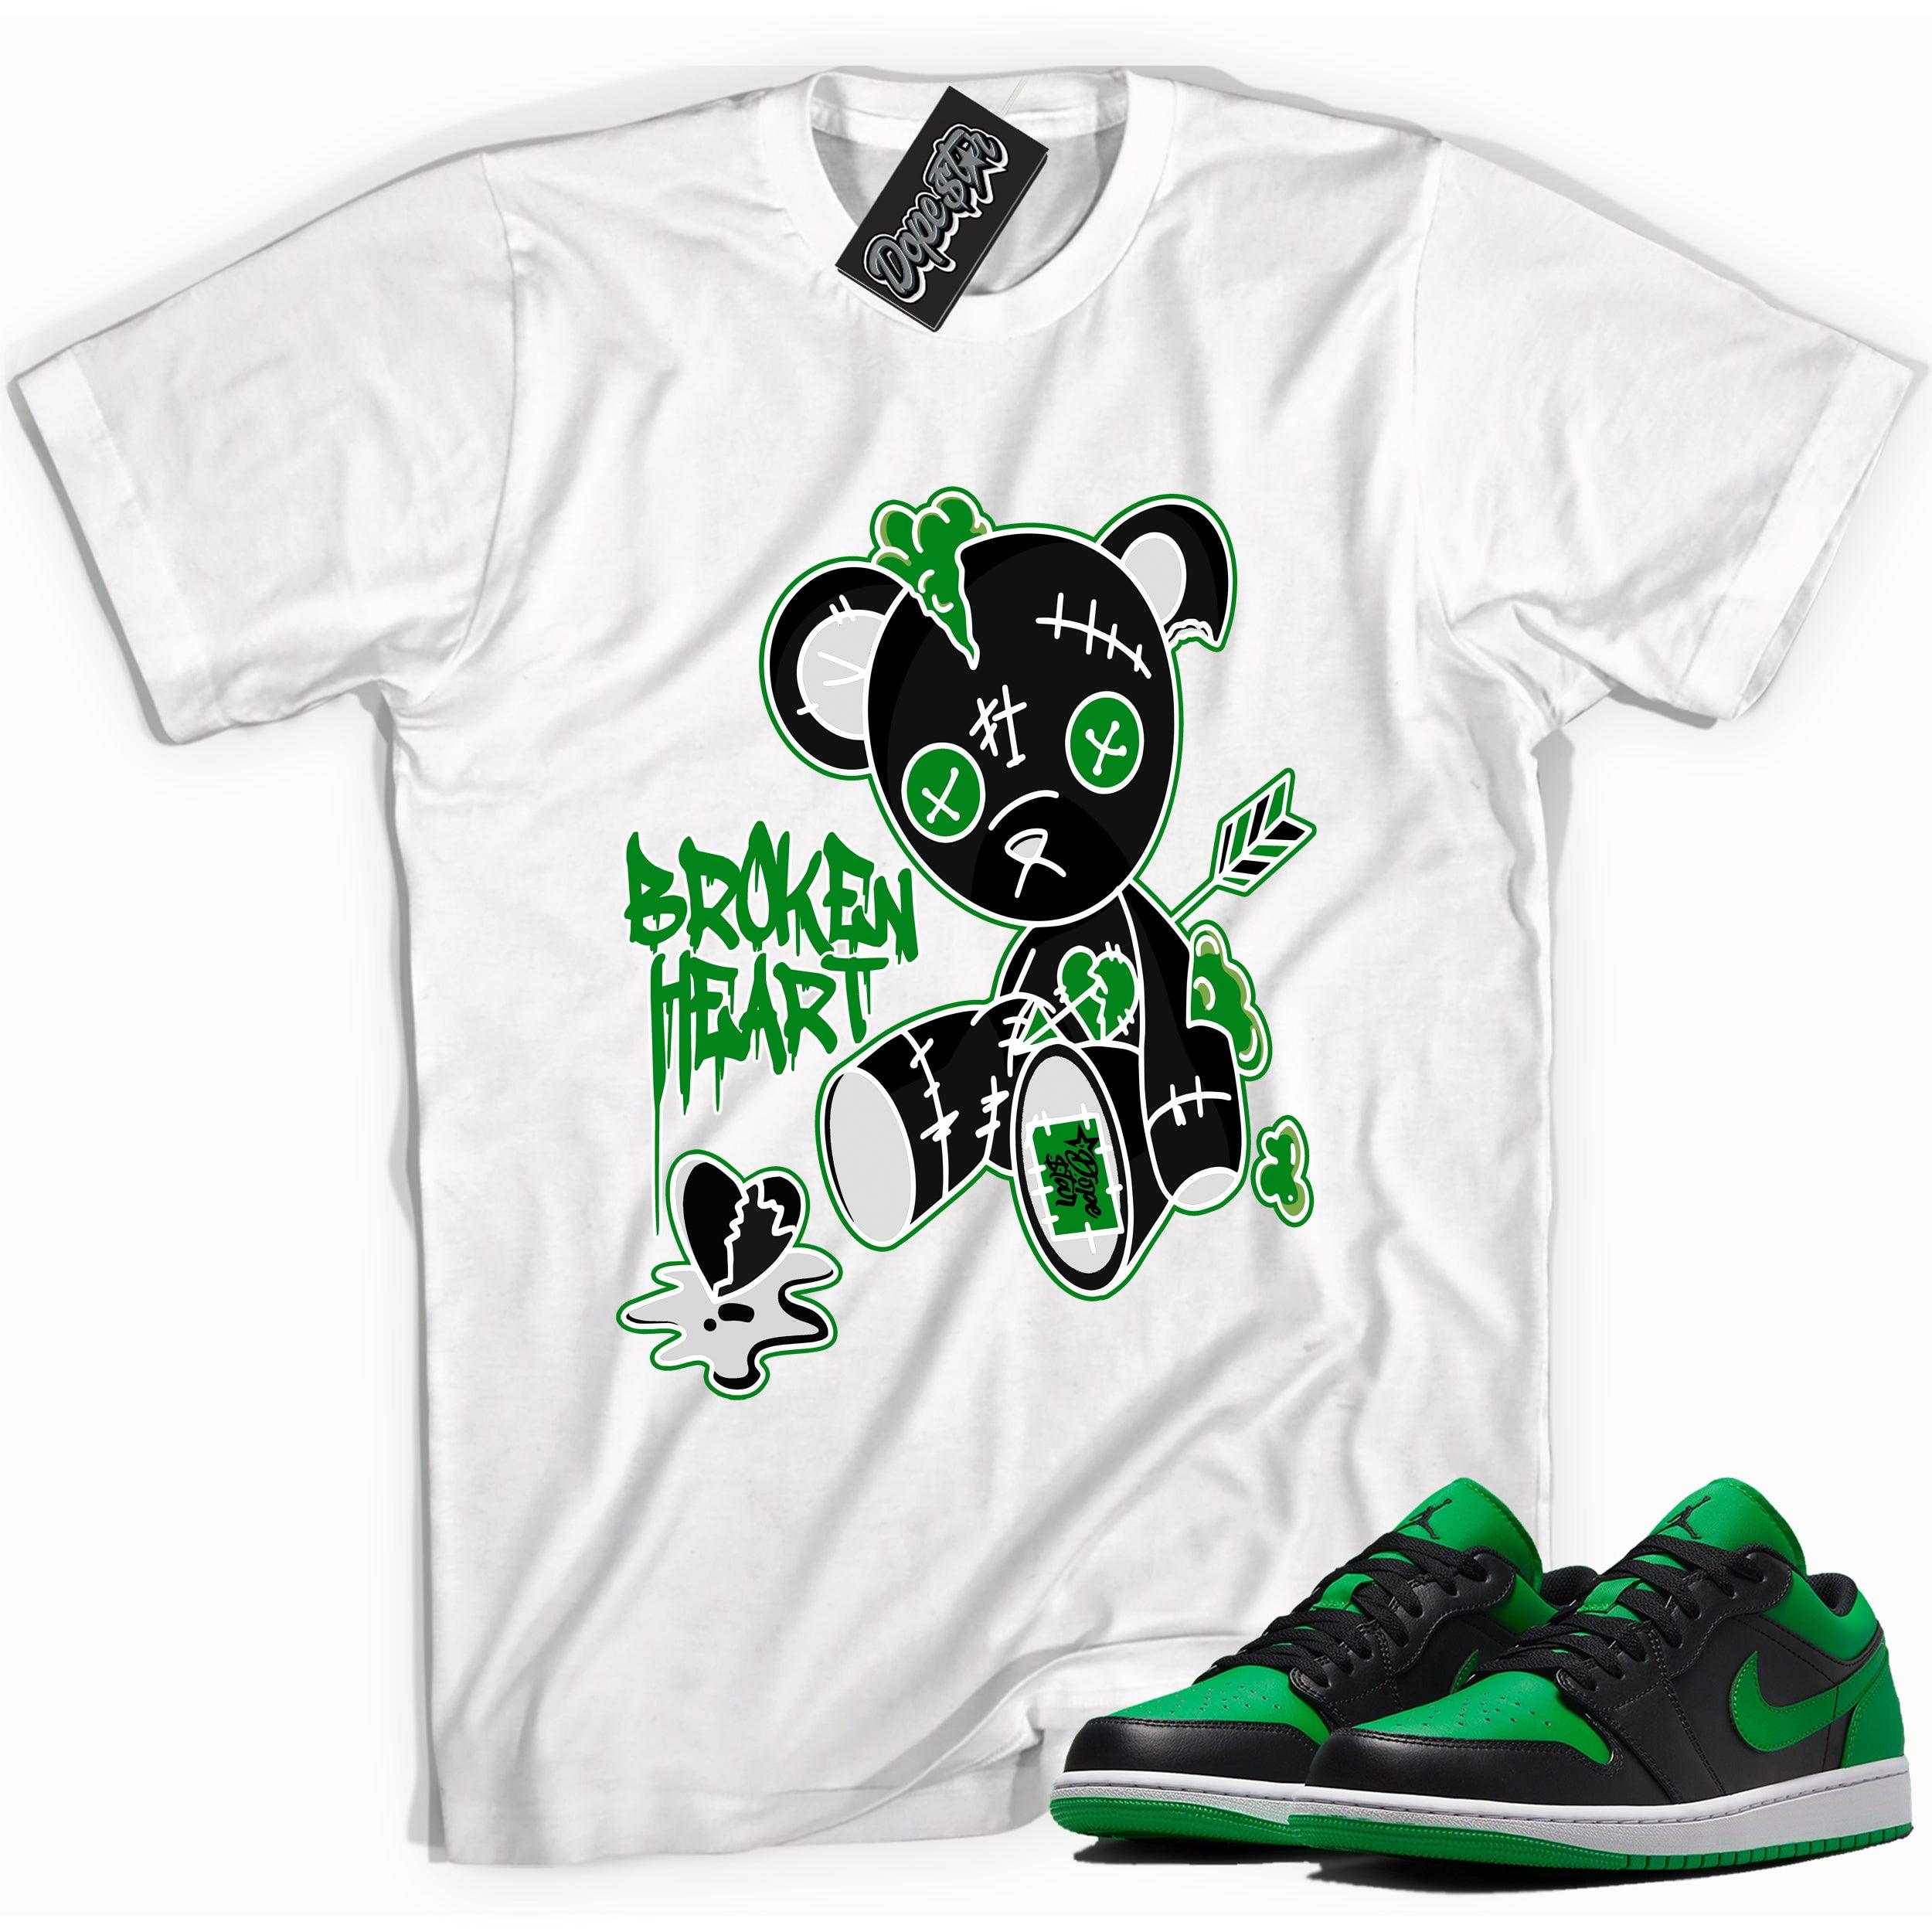 Cool white graphic tee with 'Broken Heart Bear' print, that perfectly matches Air Jordan 1 Low Lucky Green sneakers